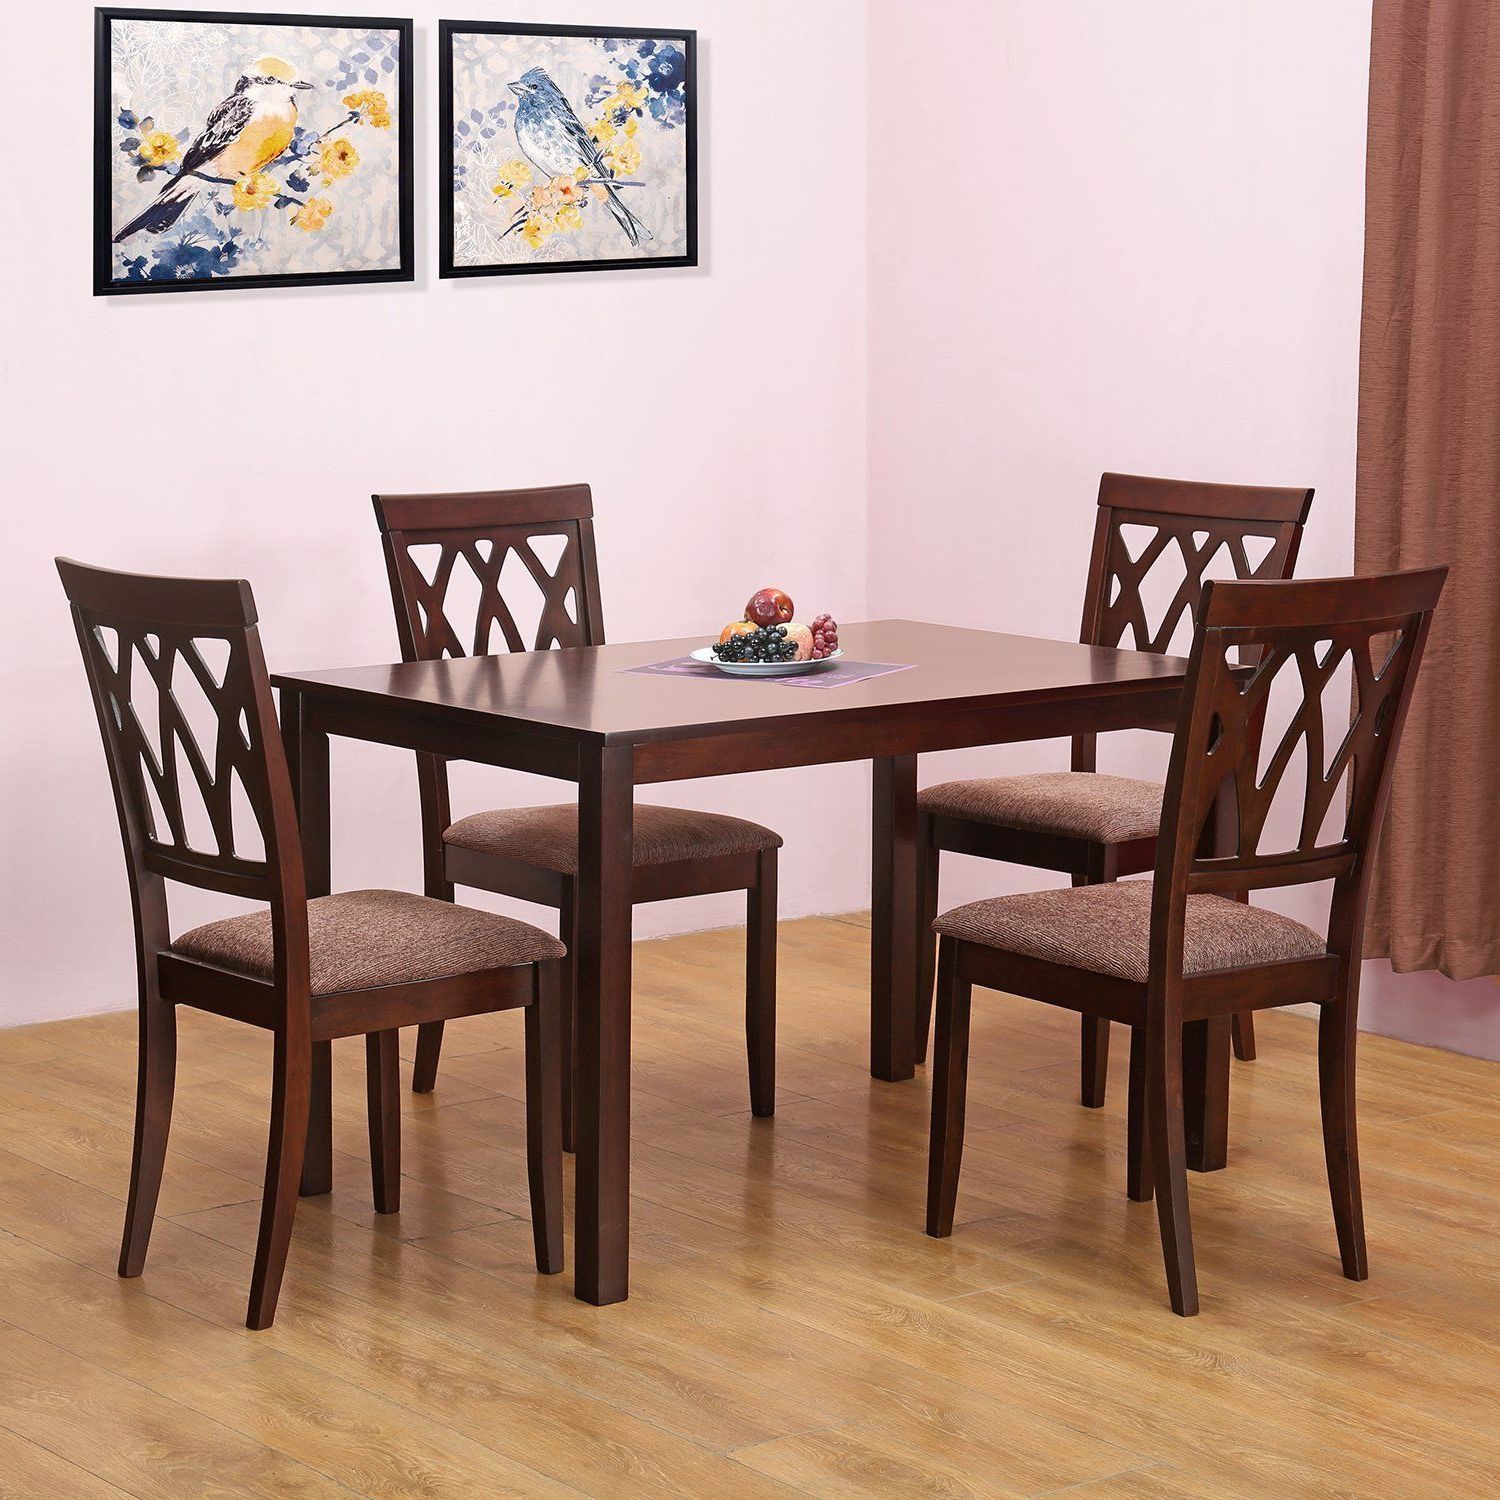 Most Popular Homenilkamal Peak Four Seater Dining Table Set (beige) – Best Pertaining To Winsted 4 Piece Counter Height Dining Sets (View 18 of 20)